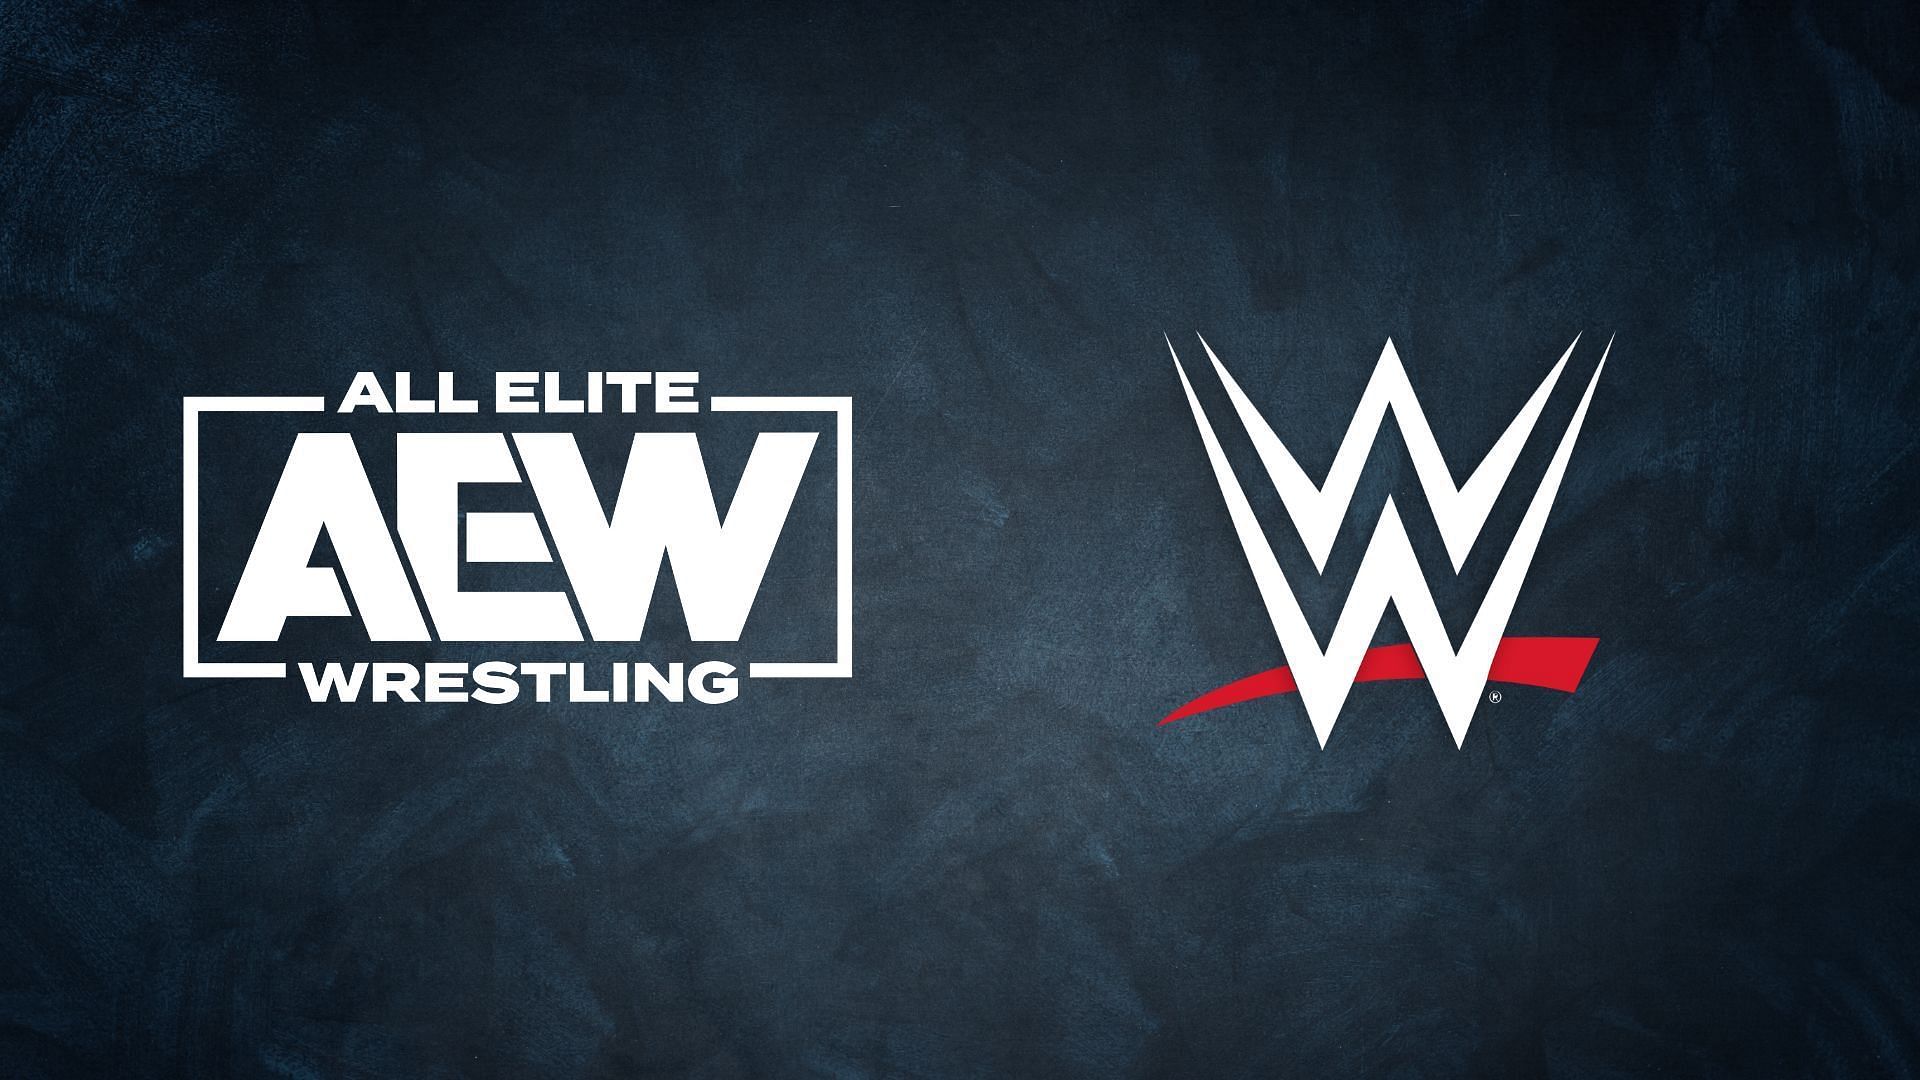 AEW is the closest competitor to WWE at present.